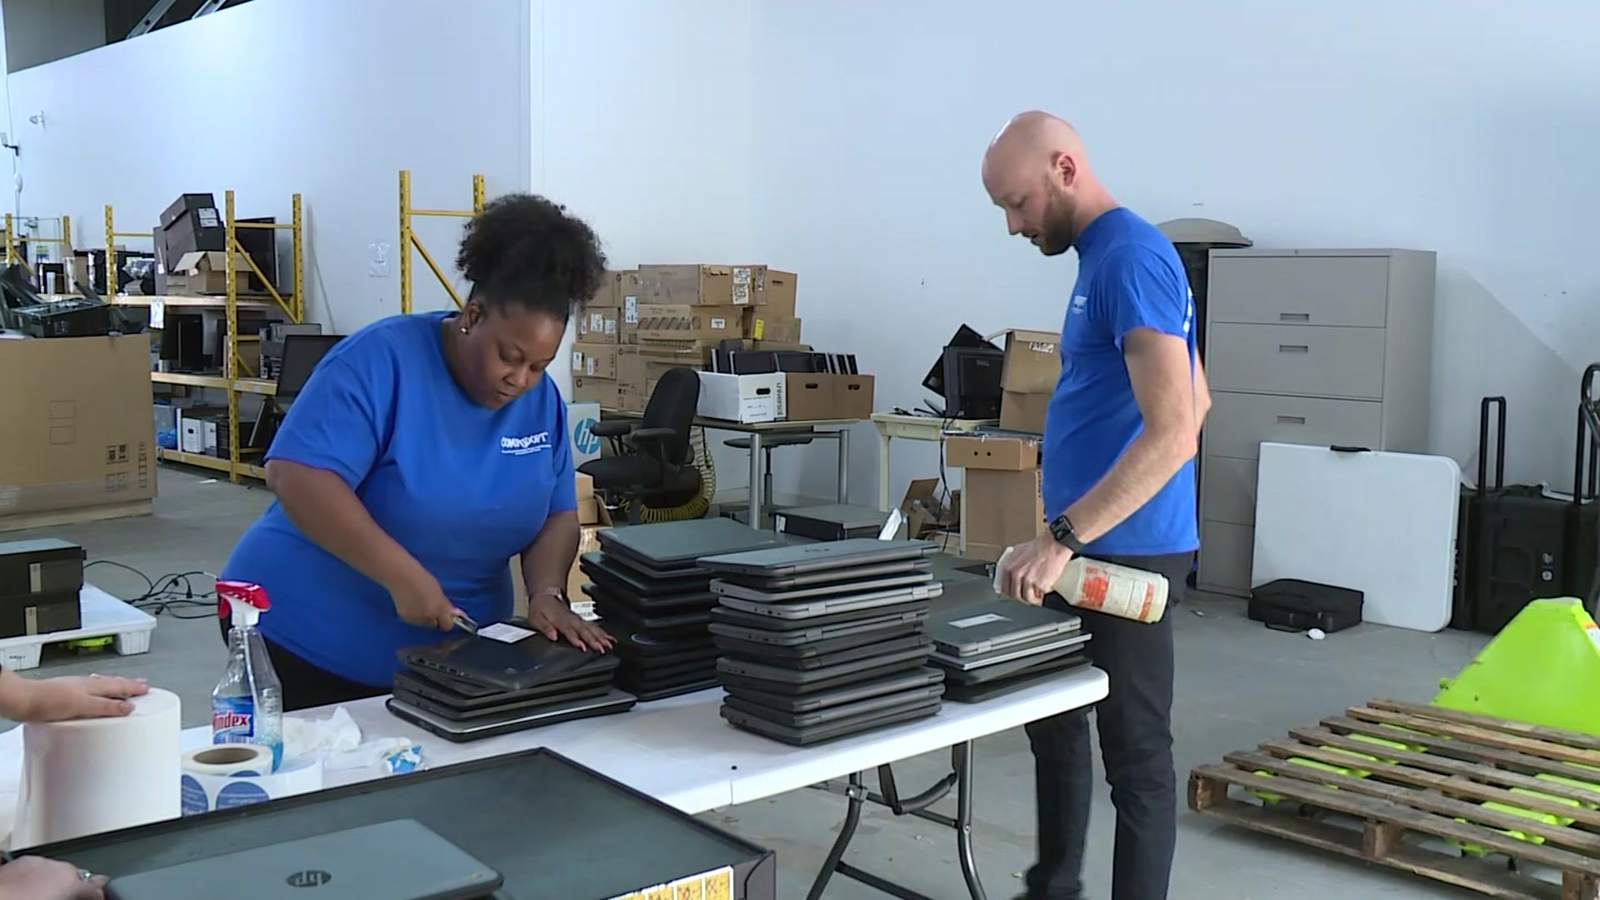 Local charity gives away 400 free laptops for students during coronavirus crisis